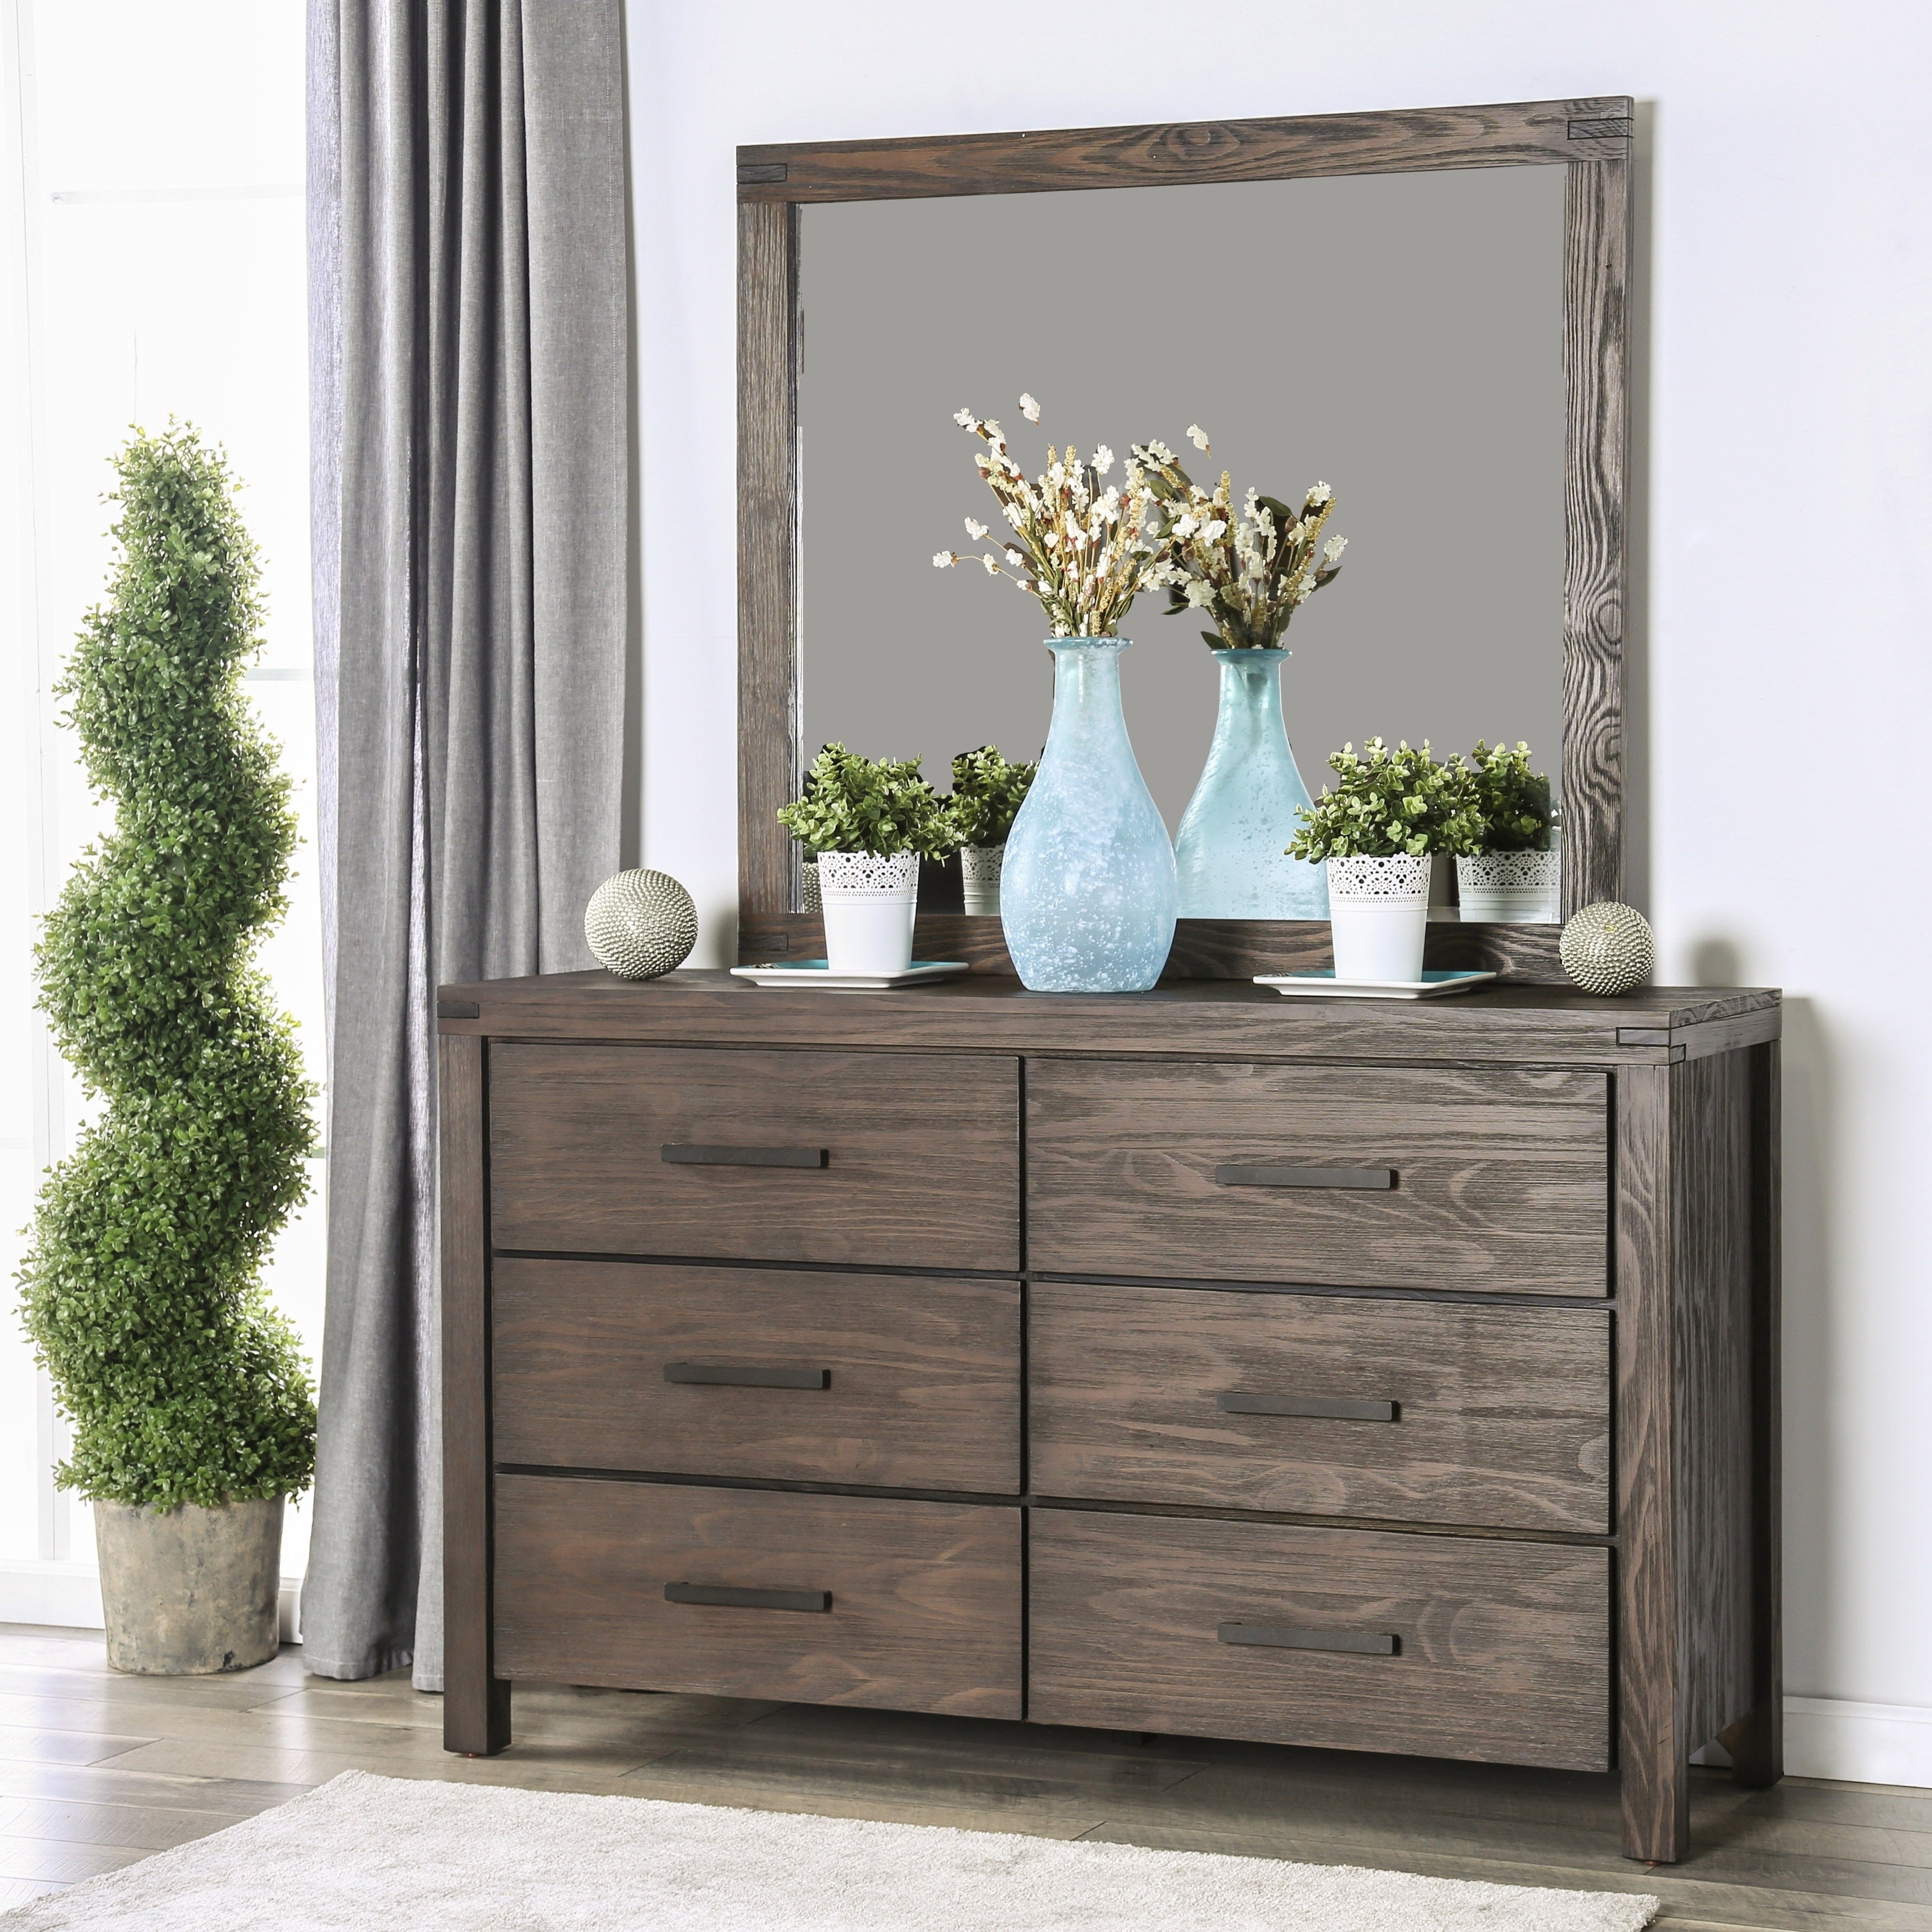 https://ak1.ostkcdn.com/images/products/is/images/direct/c51a5c603fd3905beec967c8f574e0c01181adfc/Furniture-of-America-Barrison-Transitional-2-piece-Dark-Grey-Wire-Brushed-Dresser-and-Mirror-Set.jpg